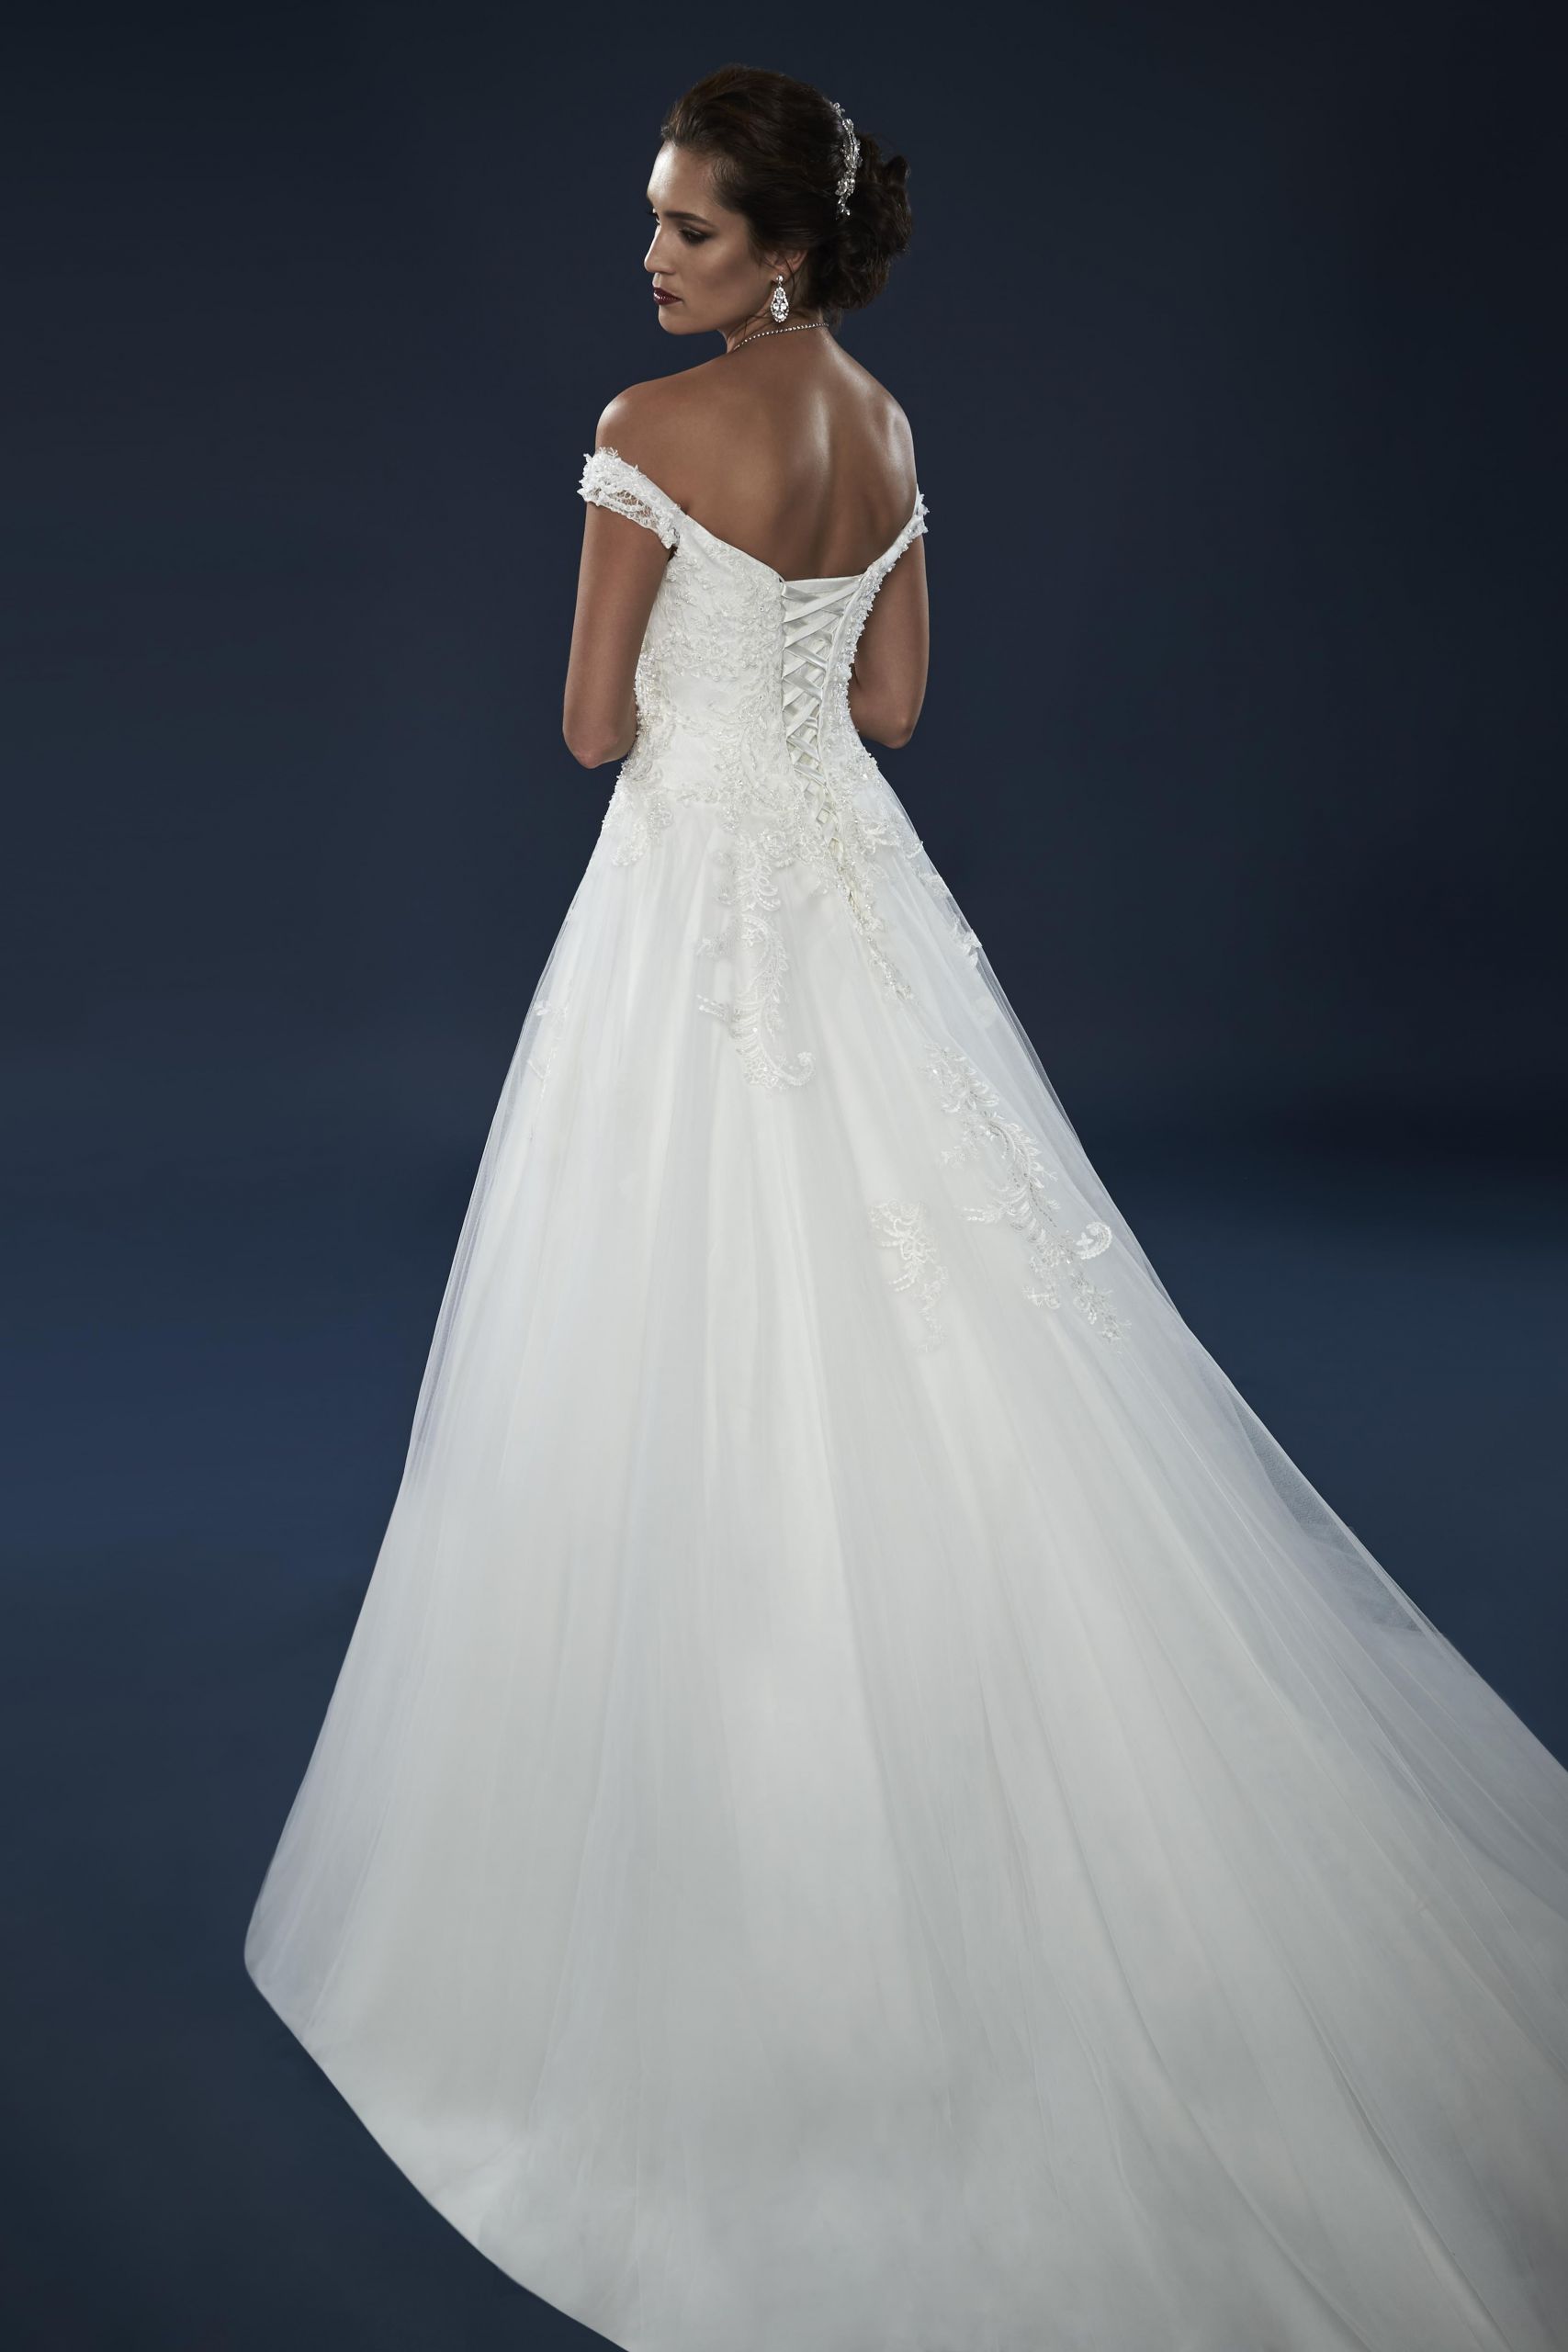 Wedding Gowns Tampa
 Tampa Wedding Dress from Opulence